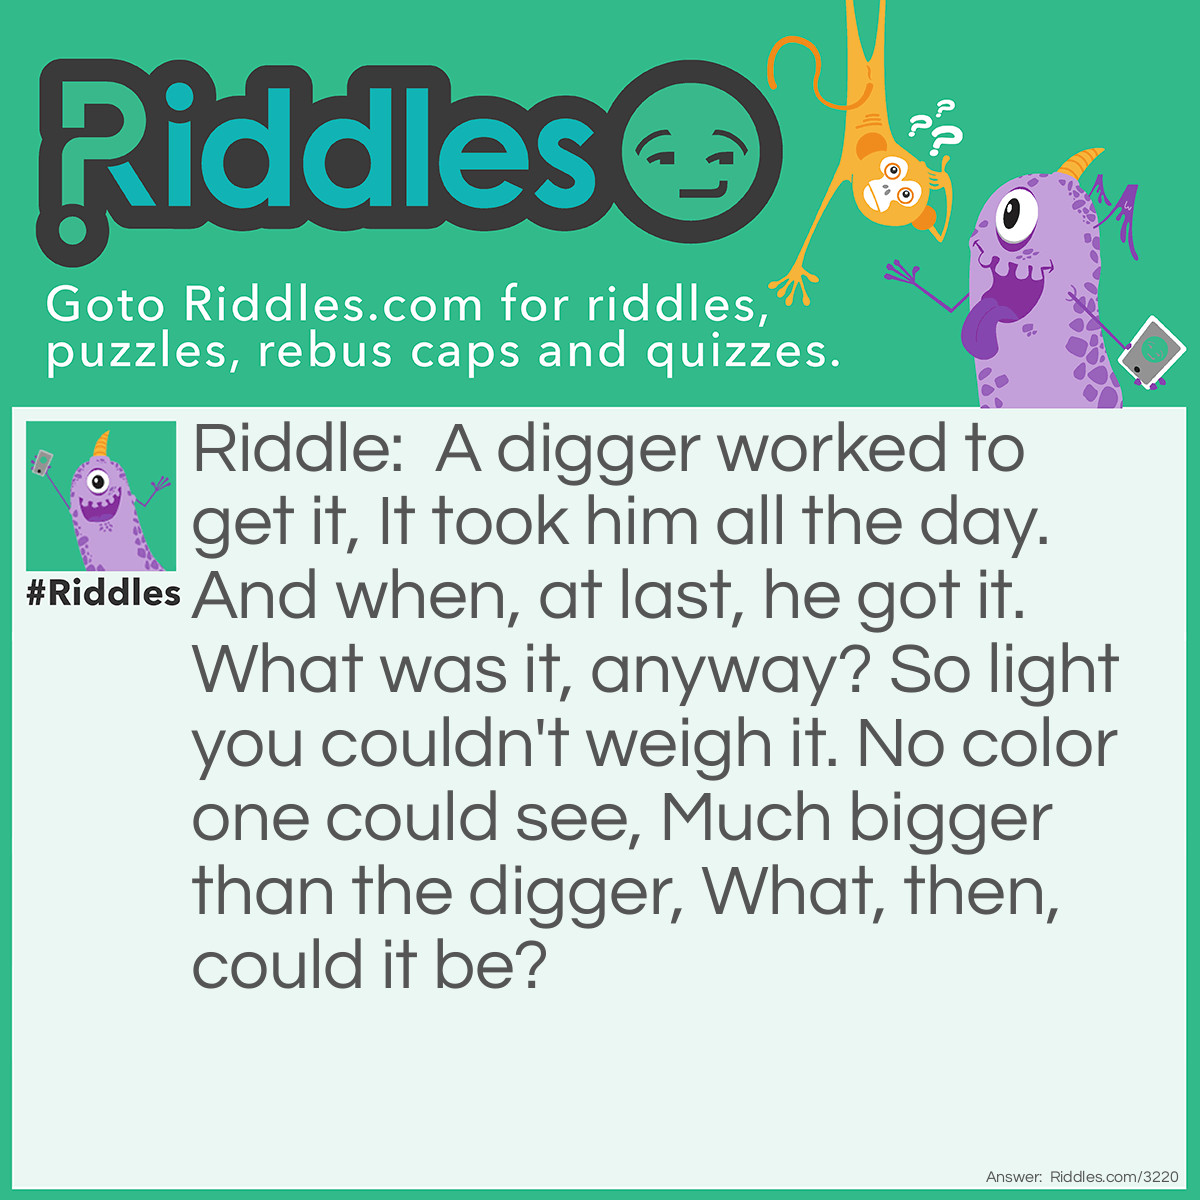 Riddle: A digger worked to get it, It took him all the day. And when, at last, he got it. What was it, anyway? So light you couldn't weigh it. No color one could see, Much bigger than the digger, What, then, could it be? Answer: A hole.